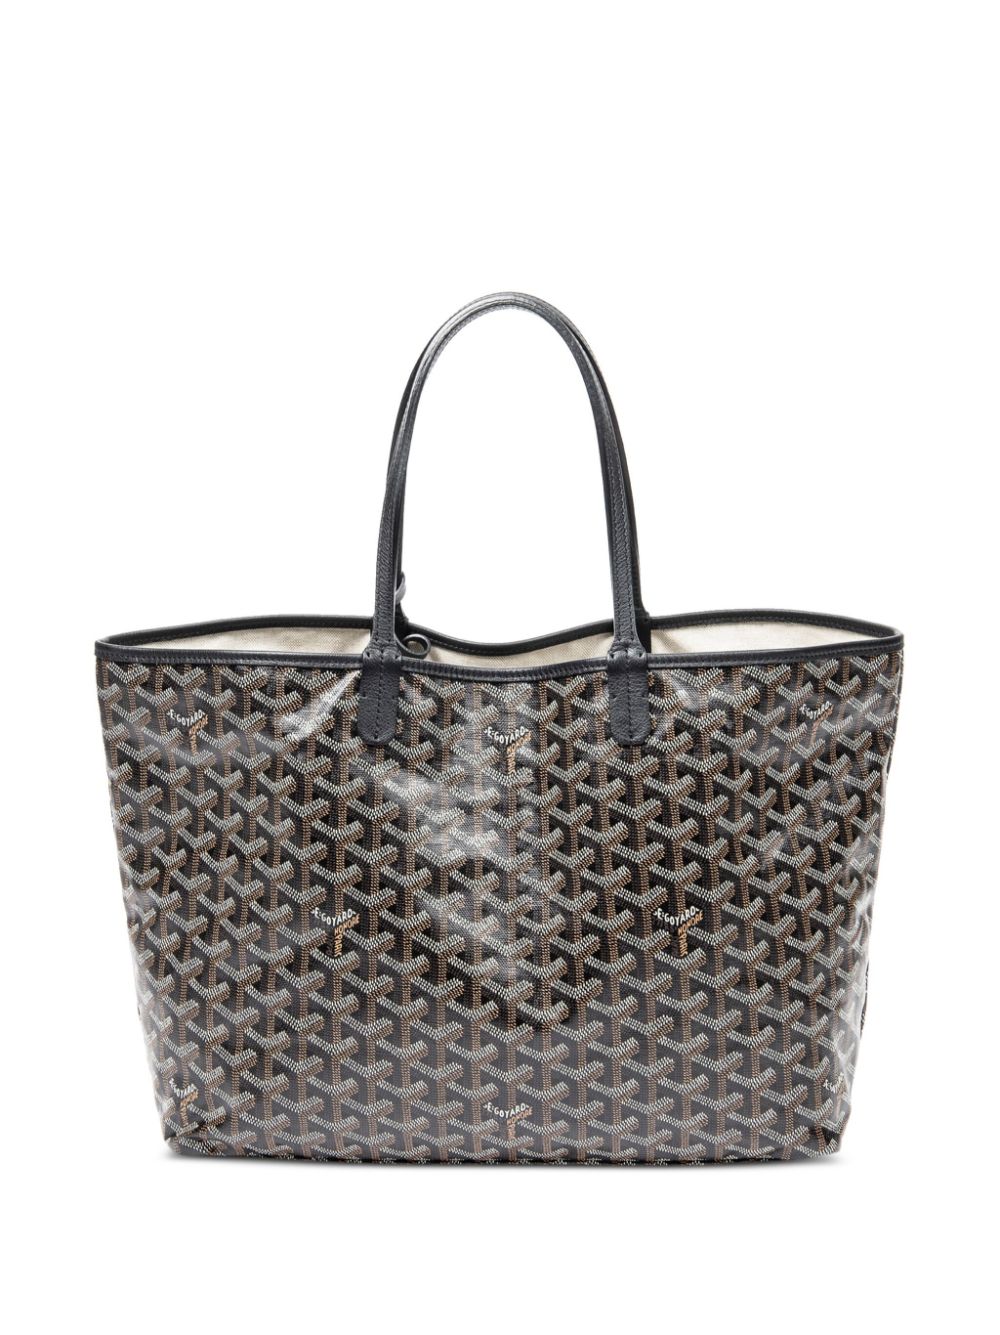 Pre-owned Goyard Goyardine St. Louis PM Tote with Pouch